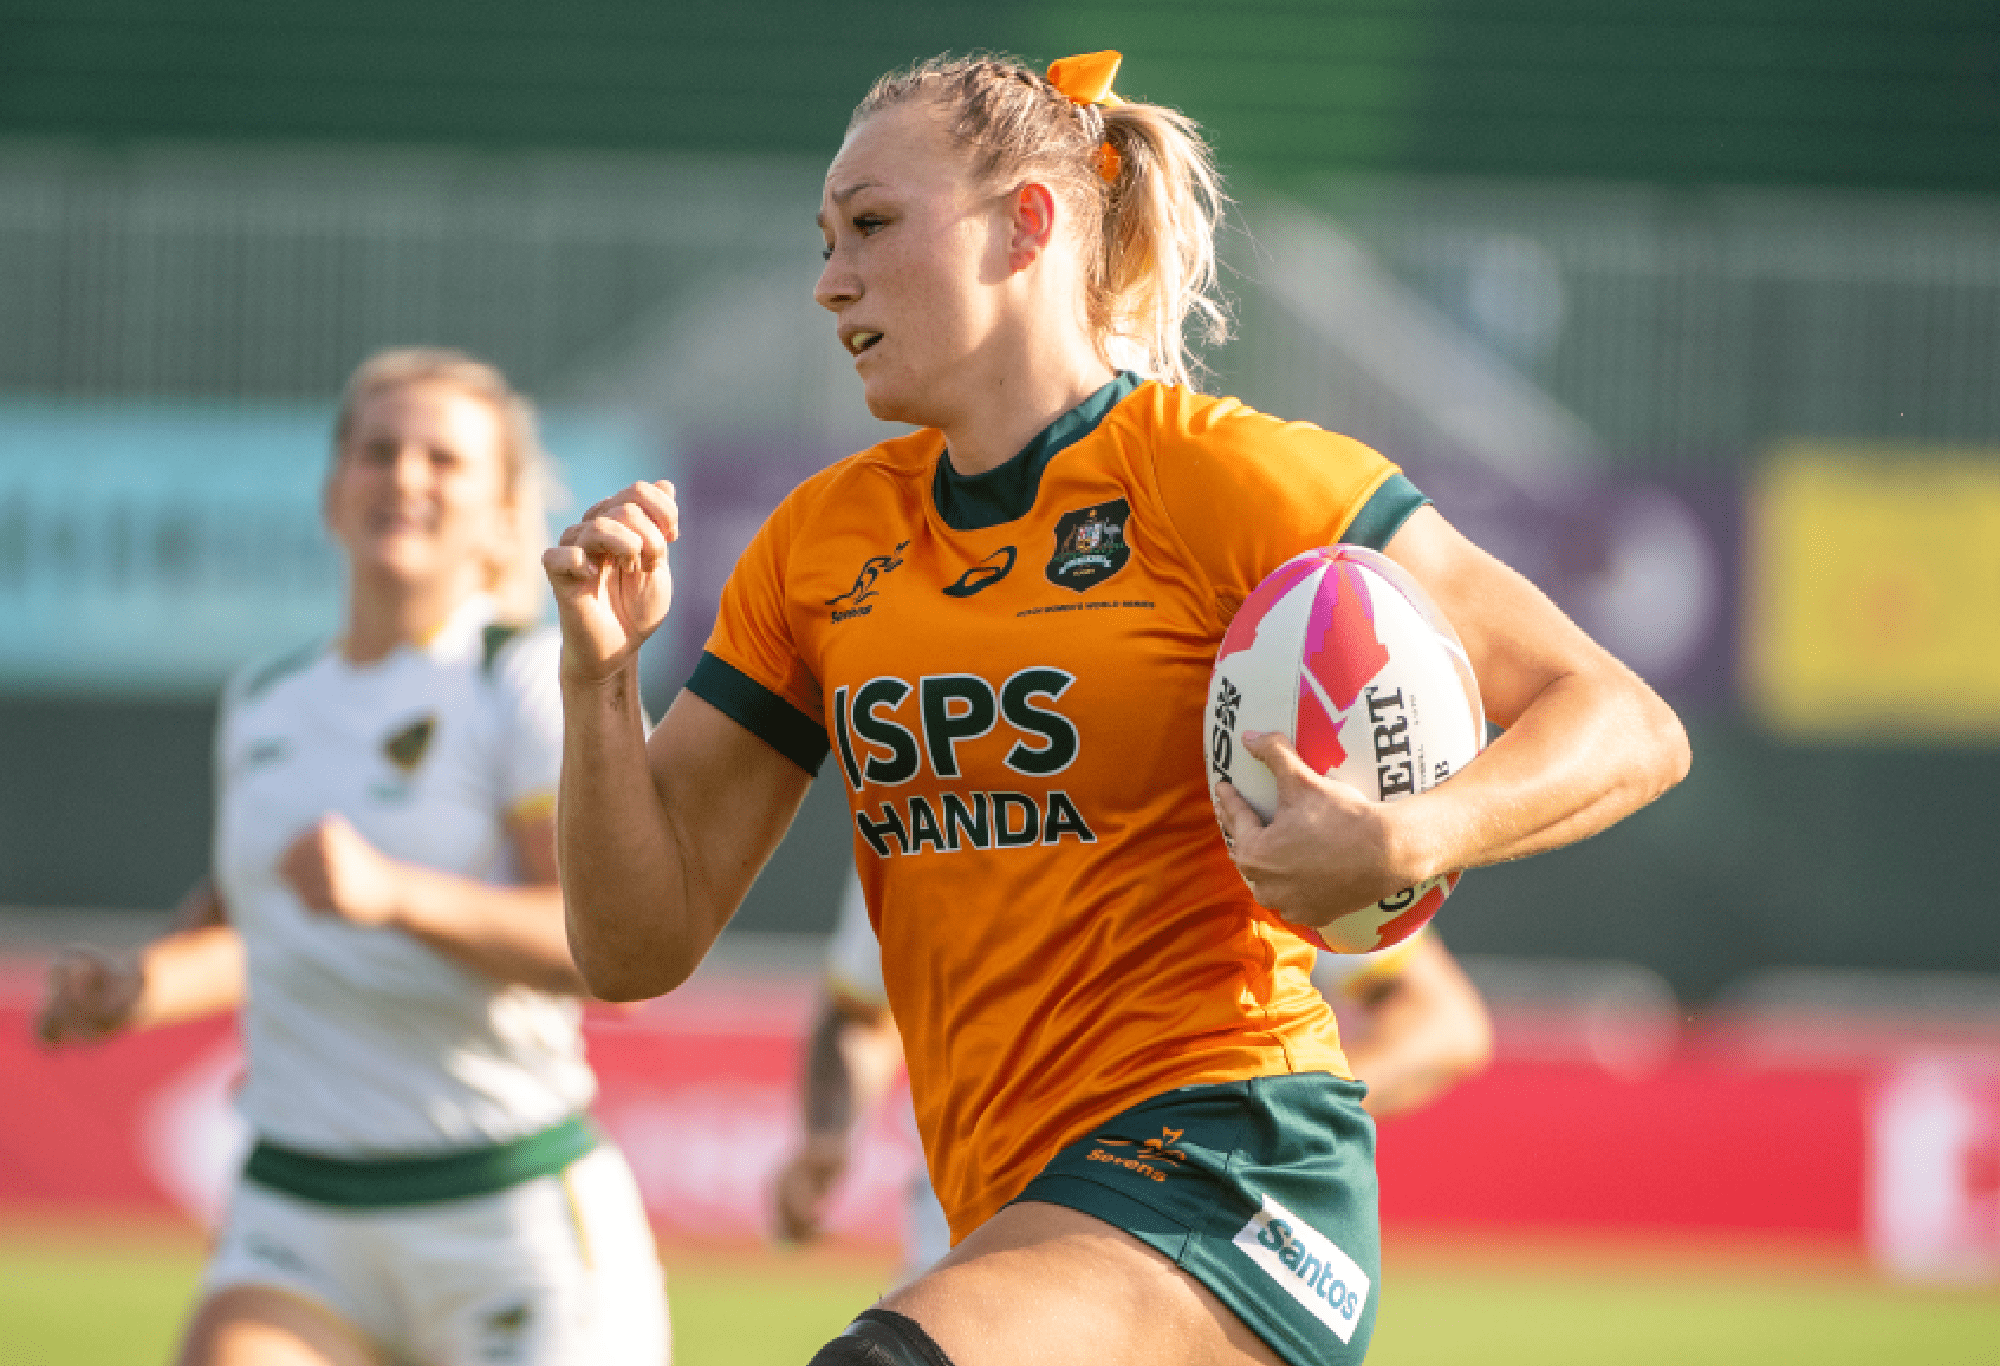 Maddison Levi of Australia runs with the ball to score a try against Brazil during the HSBC SVNS rugby tournament on December 2, 2023 in Dubai, United Arab Emirates. (Photo by Martin Dokoupil/Getty Images)